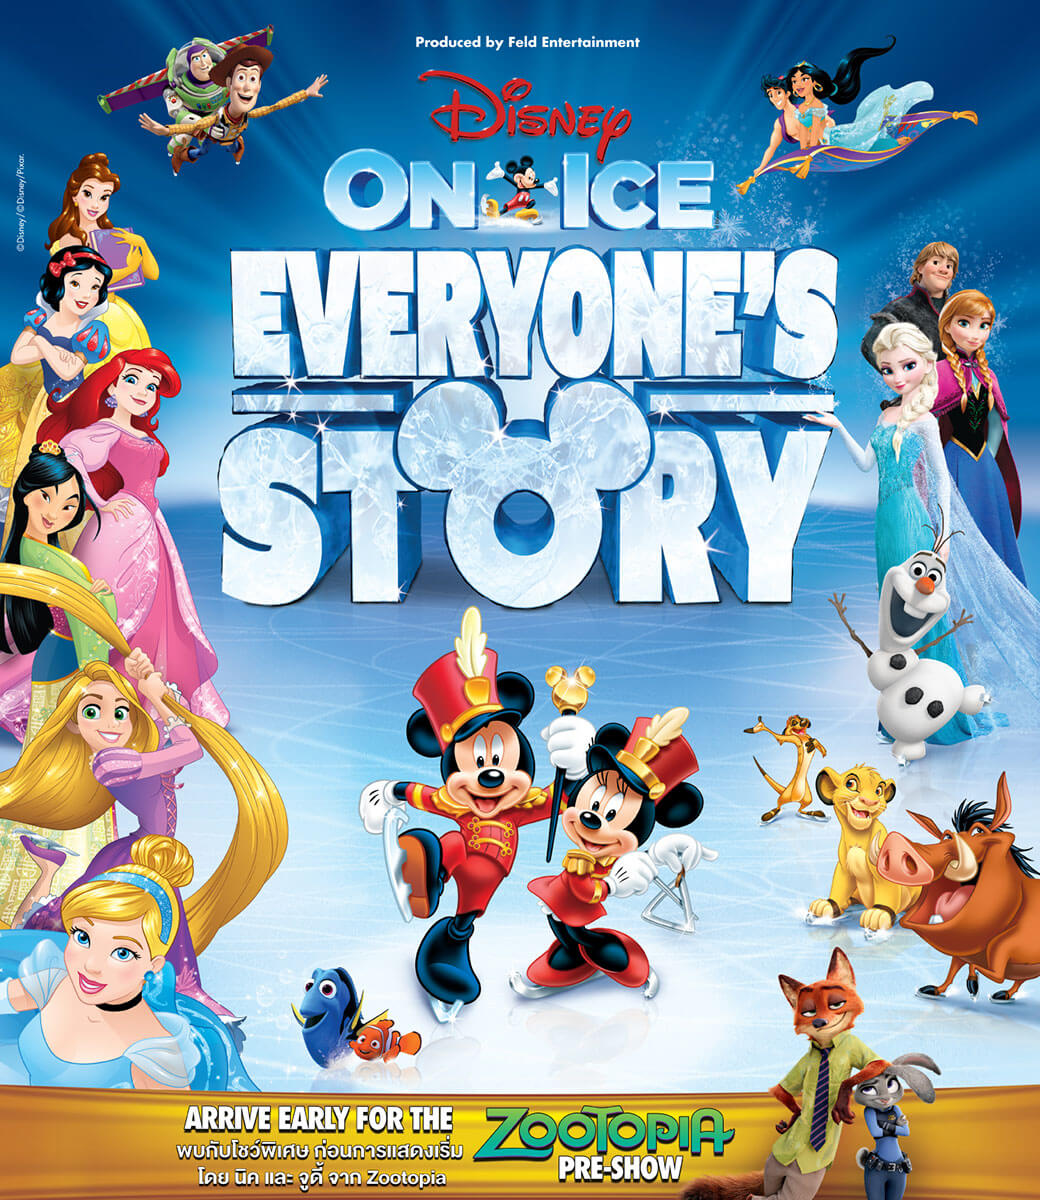 disney on ice every one's story